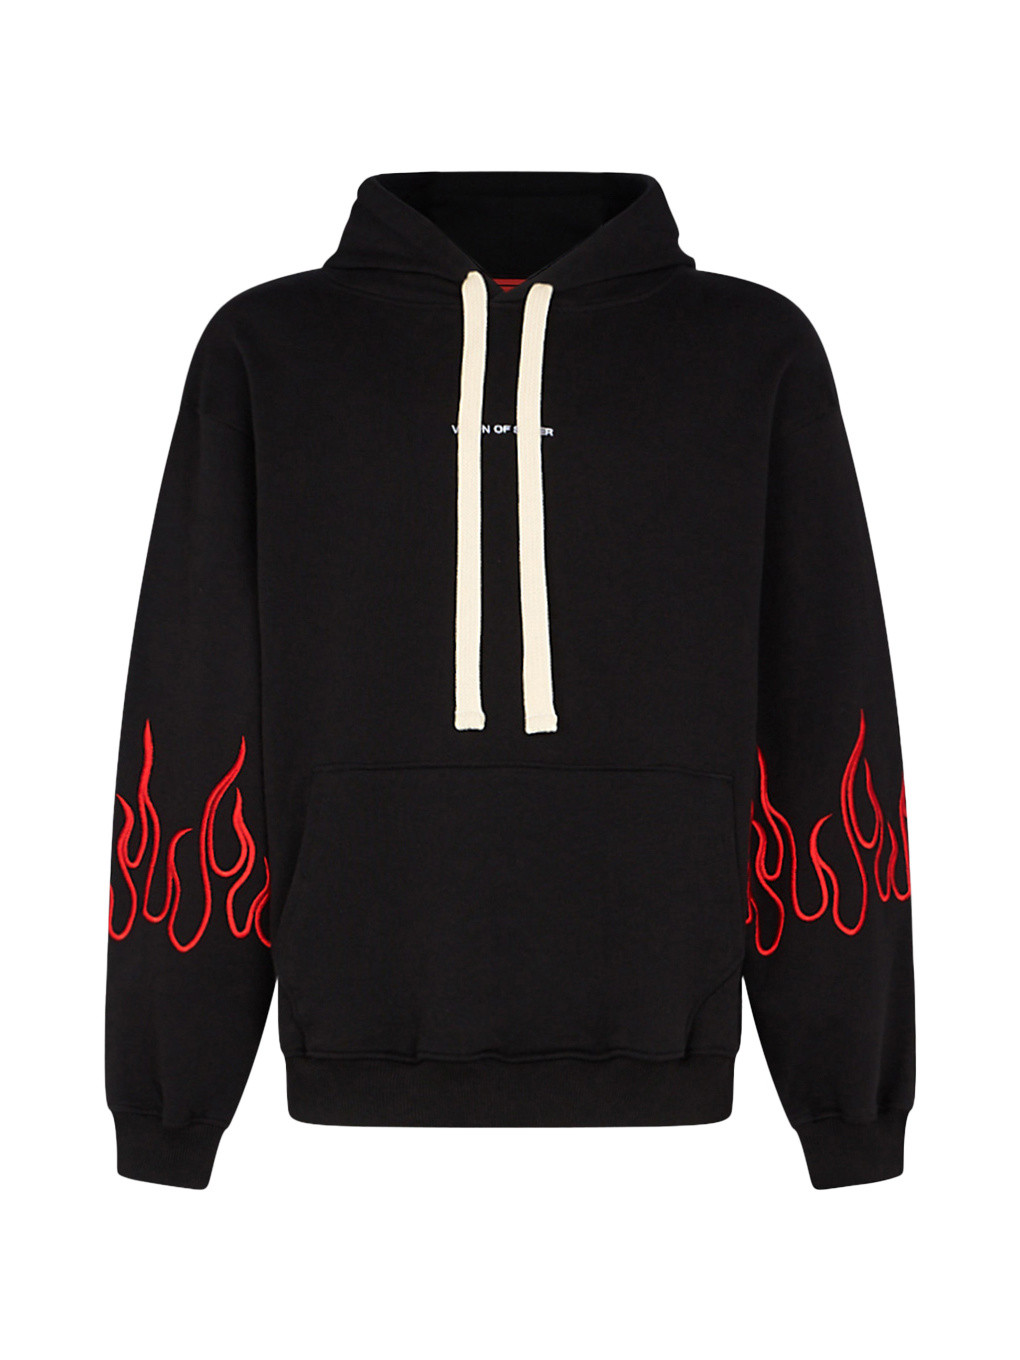 Vision of Super - Sweatshirt with embroidered flames, Black, large image number 0